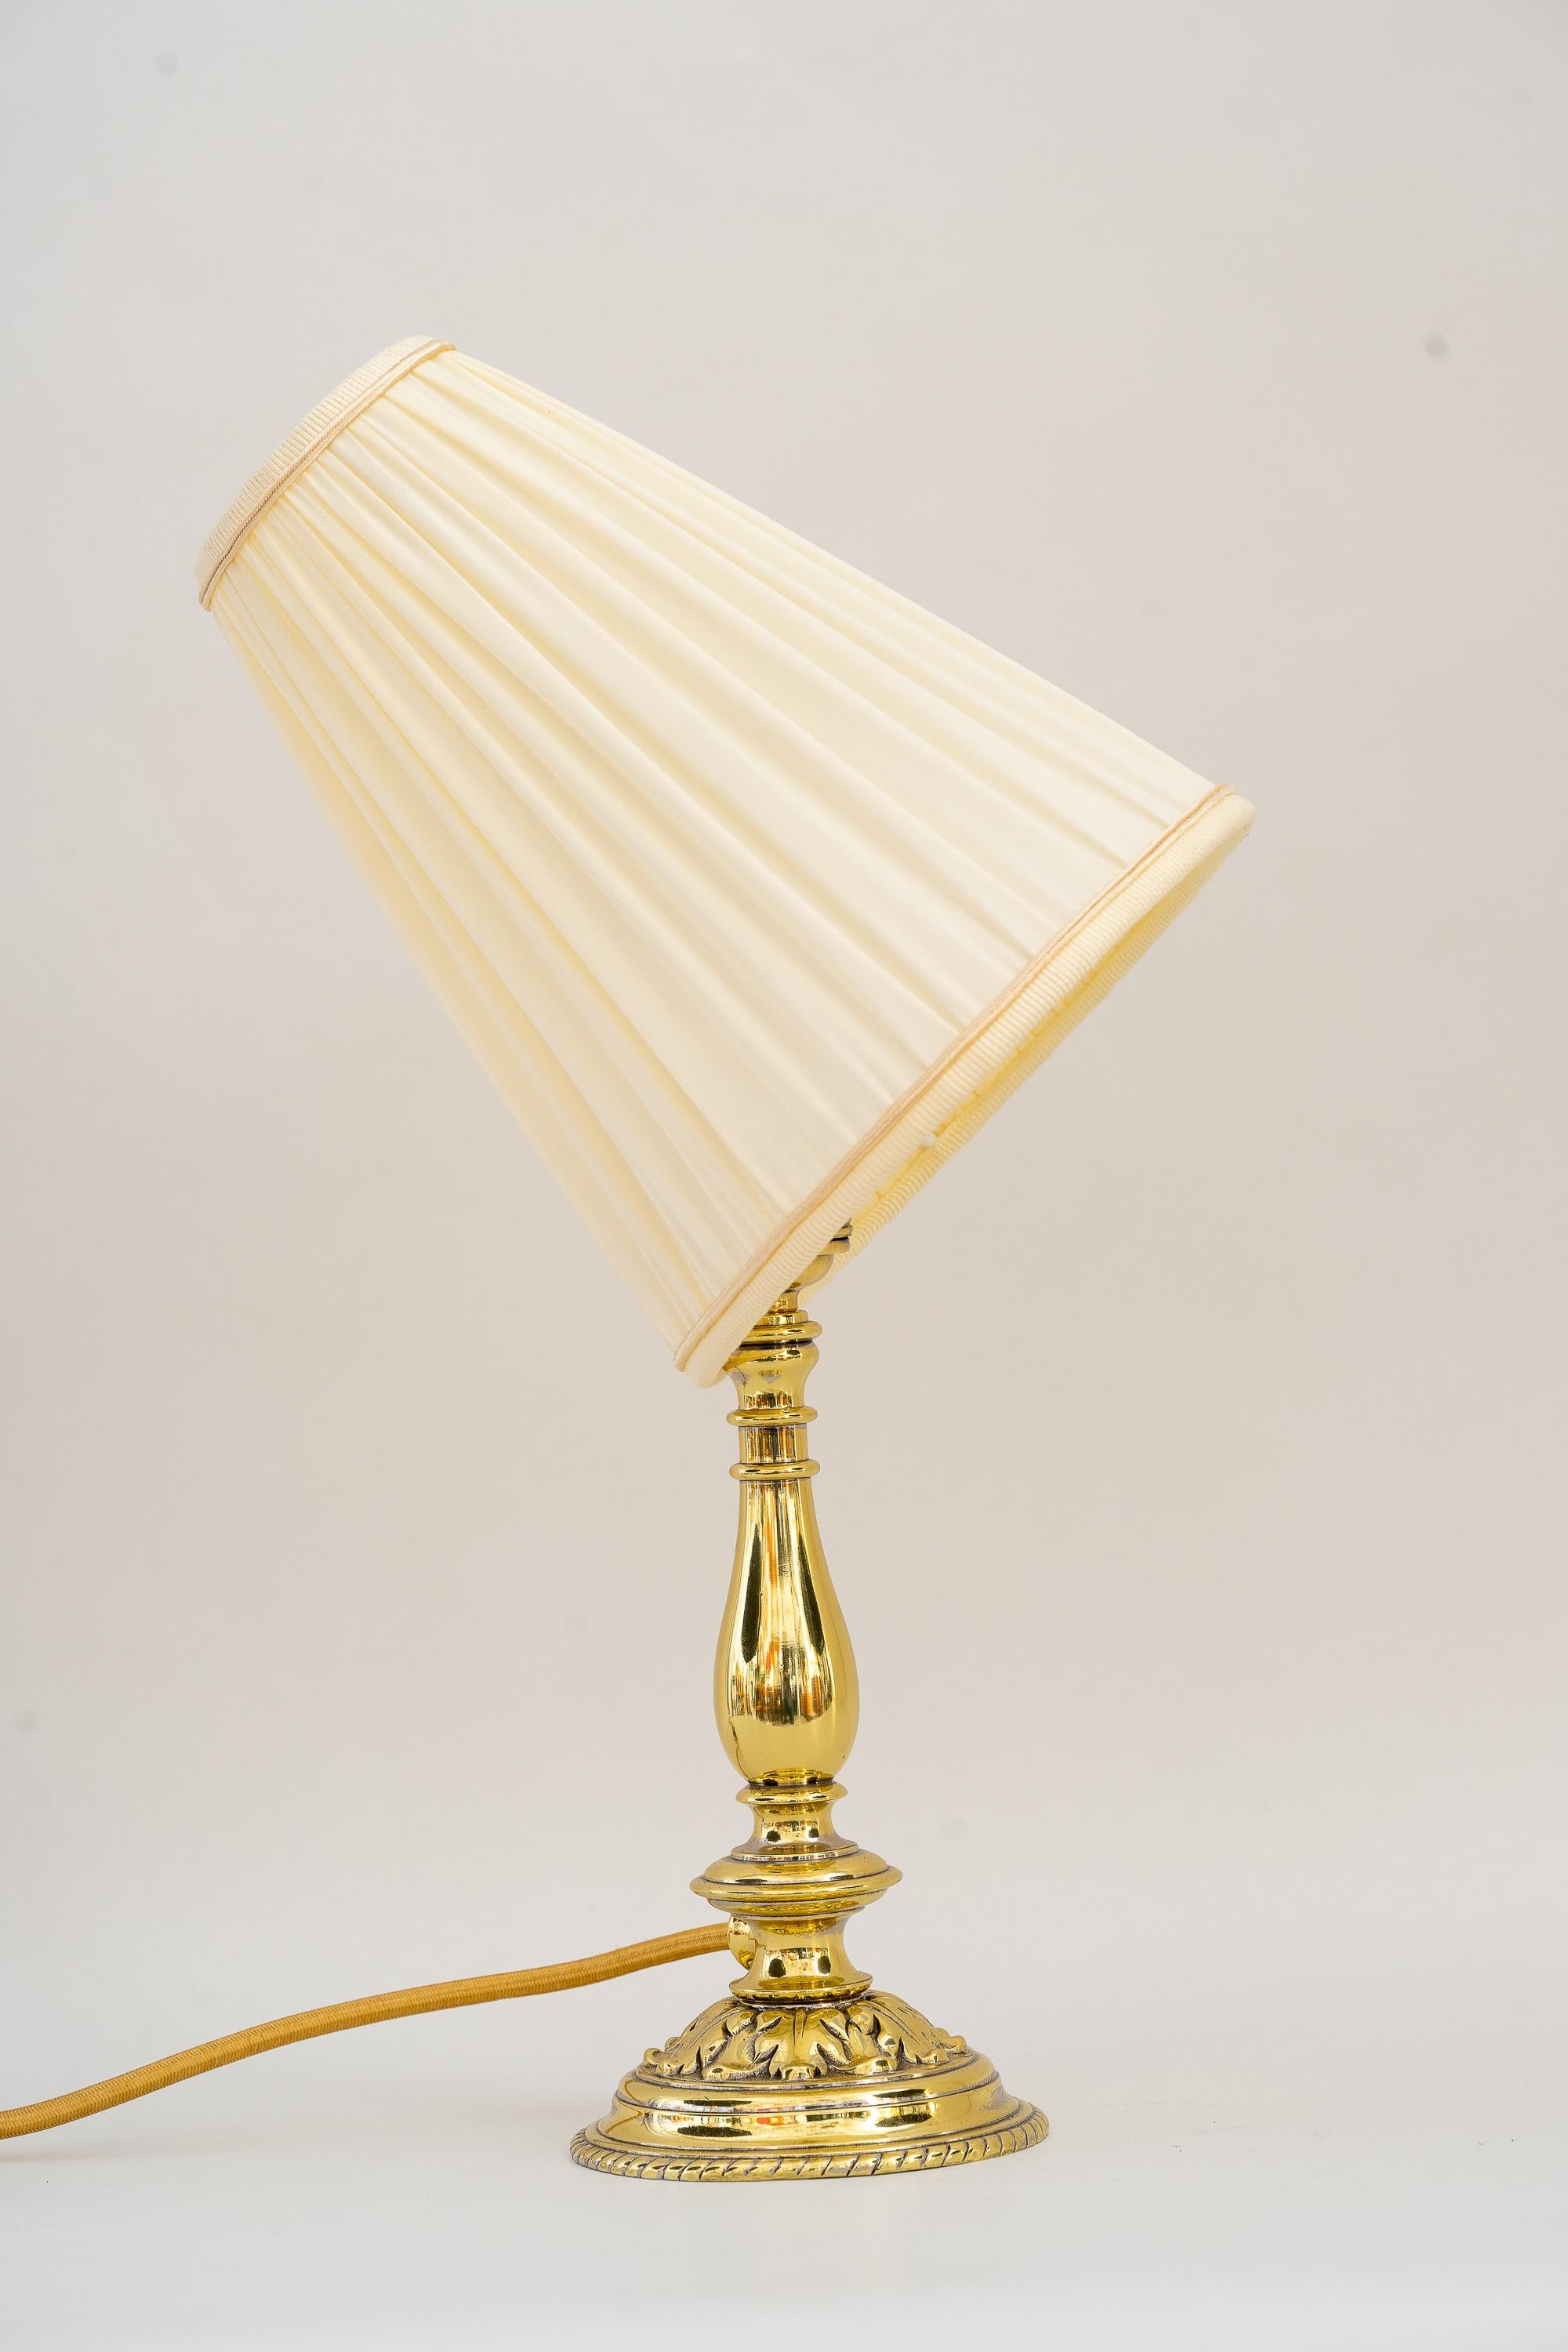 Lacquered Historistic Table Lamp, Vienna, Around 1890s